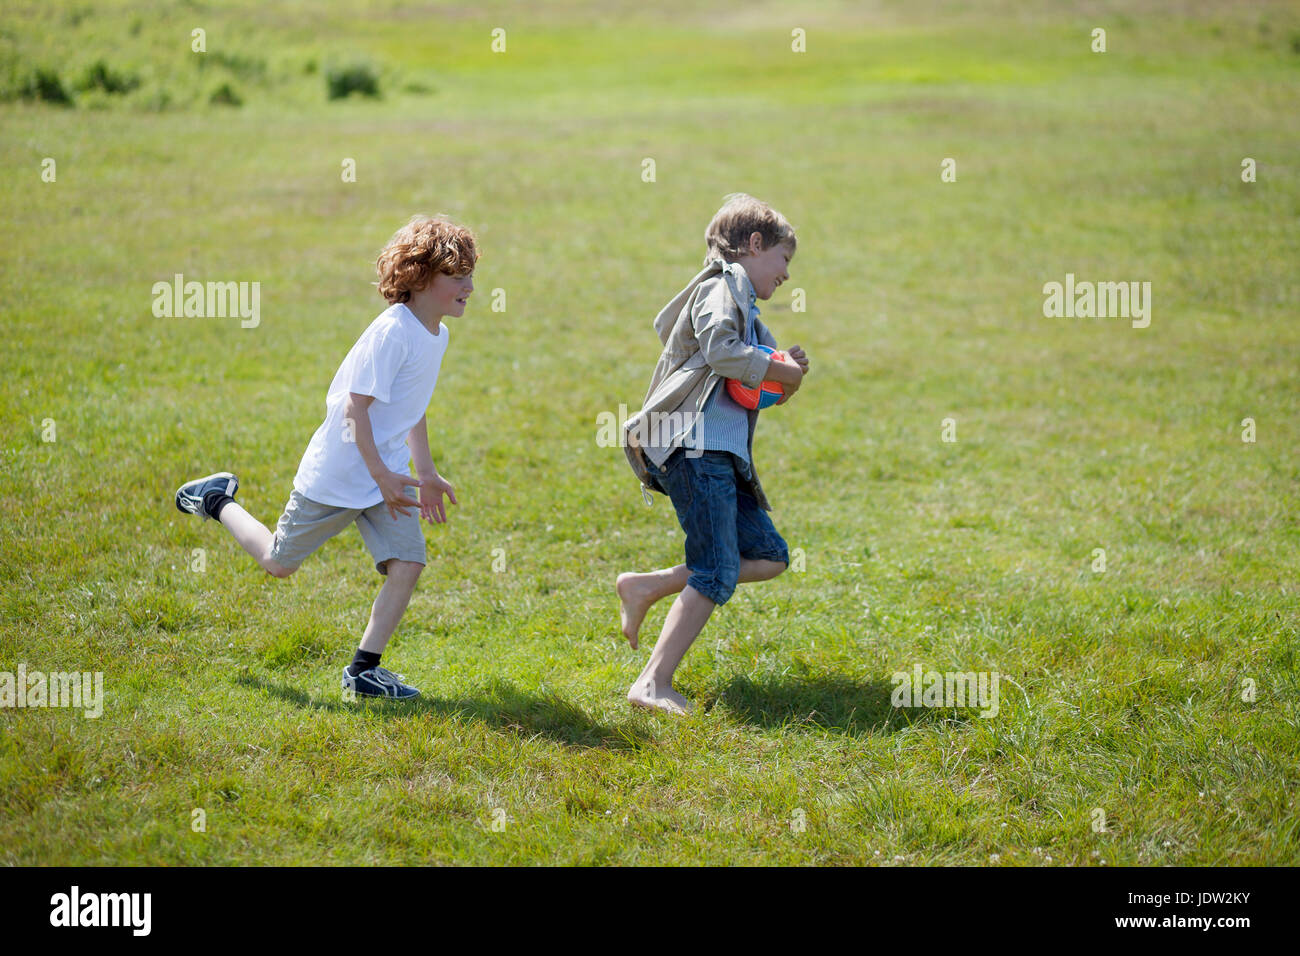 Children chasing each other outdoors Stock Photo